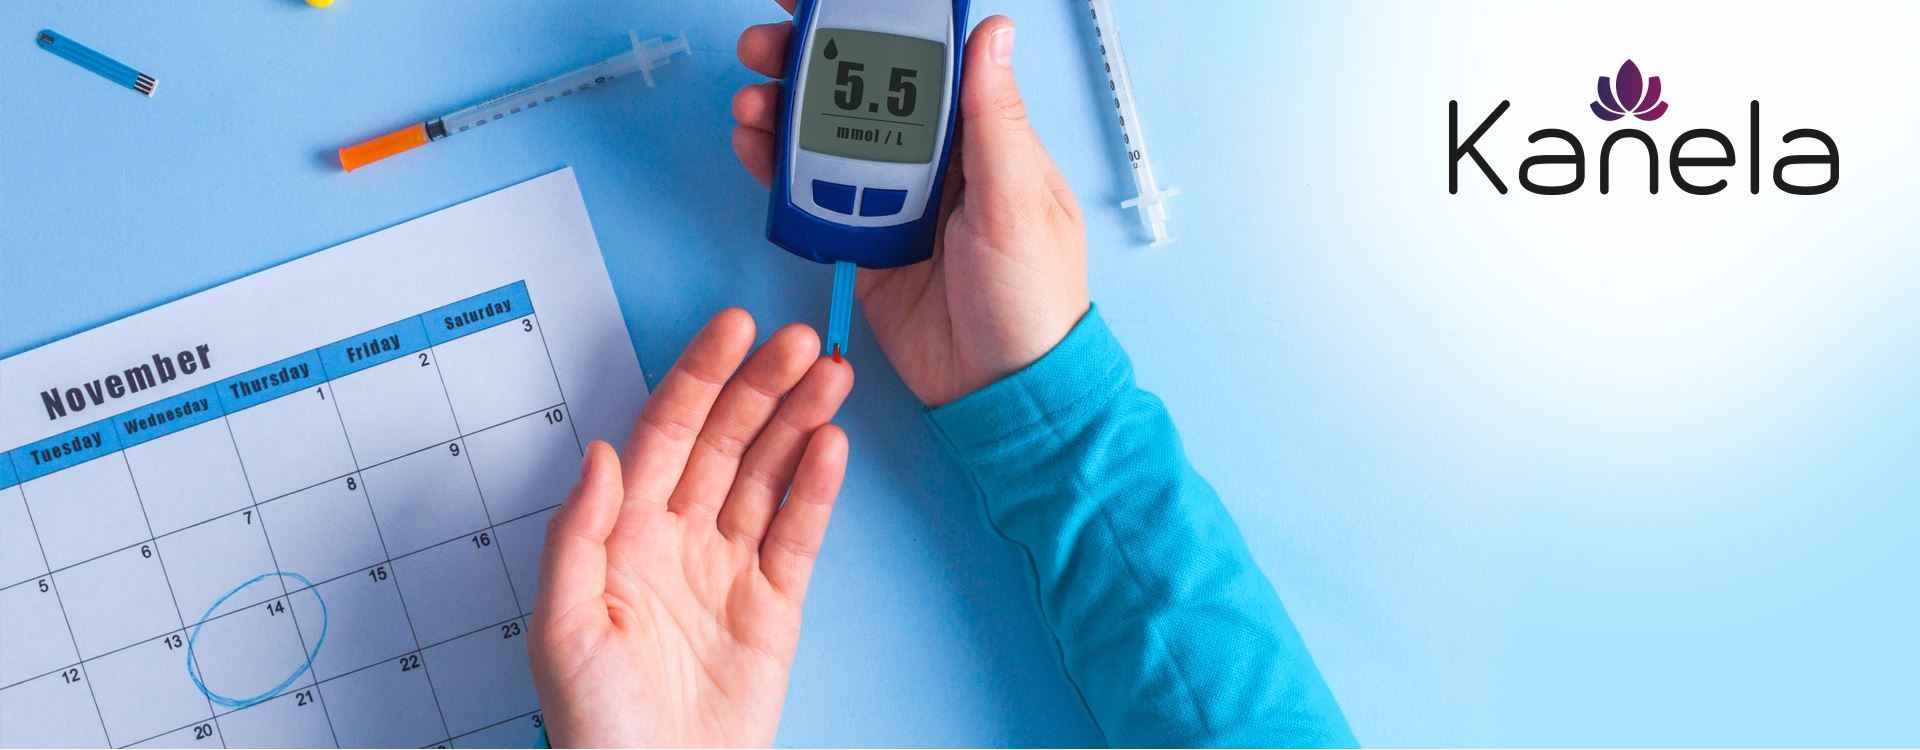 Diabetes - What Are The Causes And Symptoms?